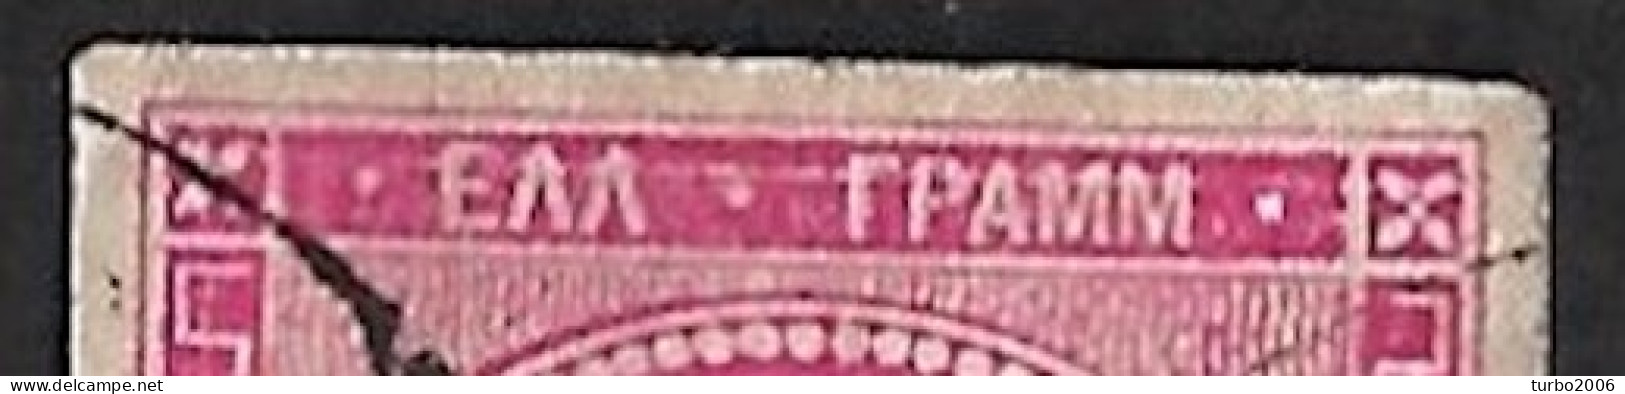 Plateflaw 20F6 (horizontal Line) In GREECE 1880-86 Large Hermes Head Athens Issue 20 L Aniline Red Vl. 72 A / H 59 II A - Used Stamps